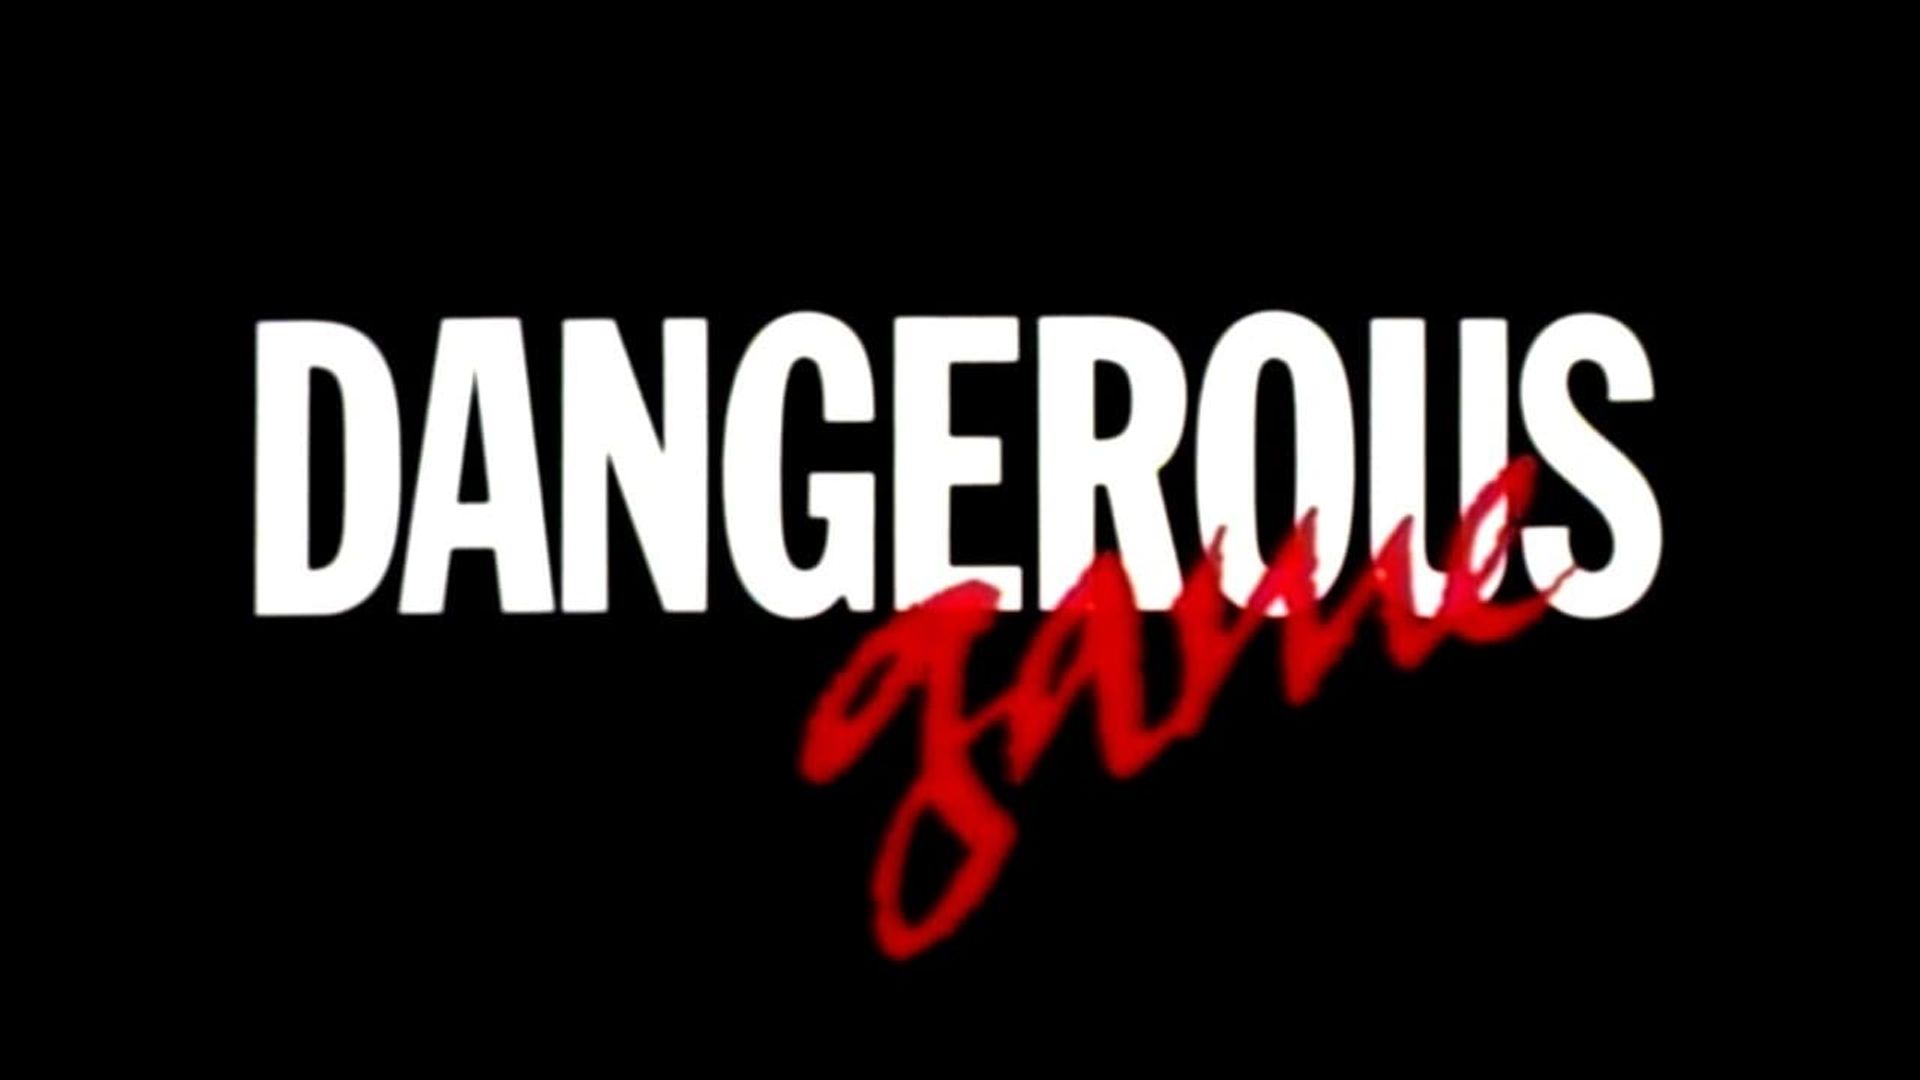 Dangerous Game background